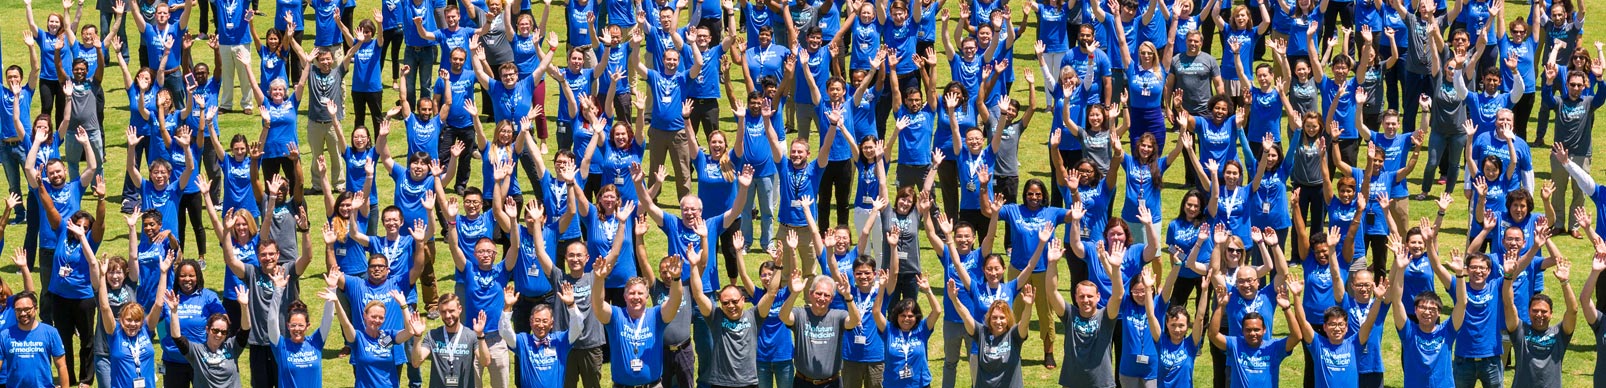 Members of the Simmons Comprehensive Cancer Center wearing blue or gray shirts wave while standing in a field